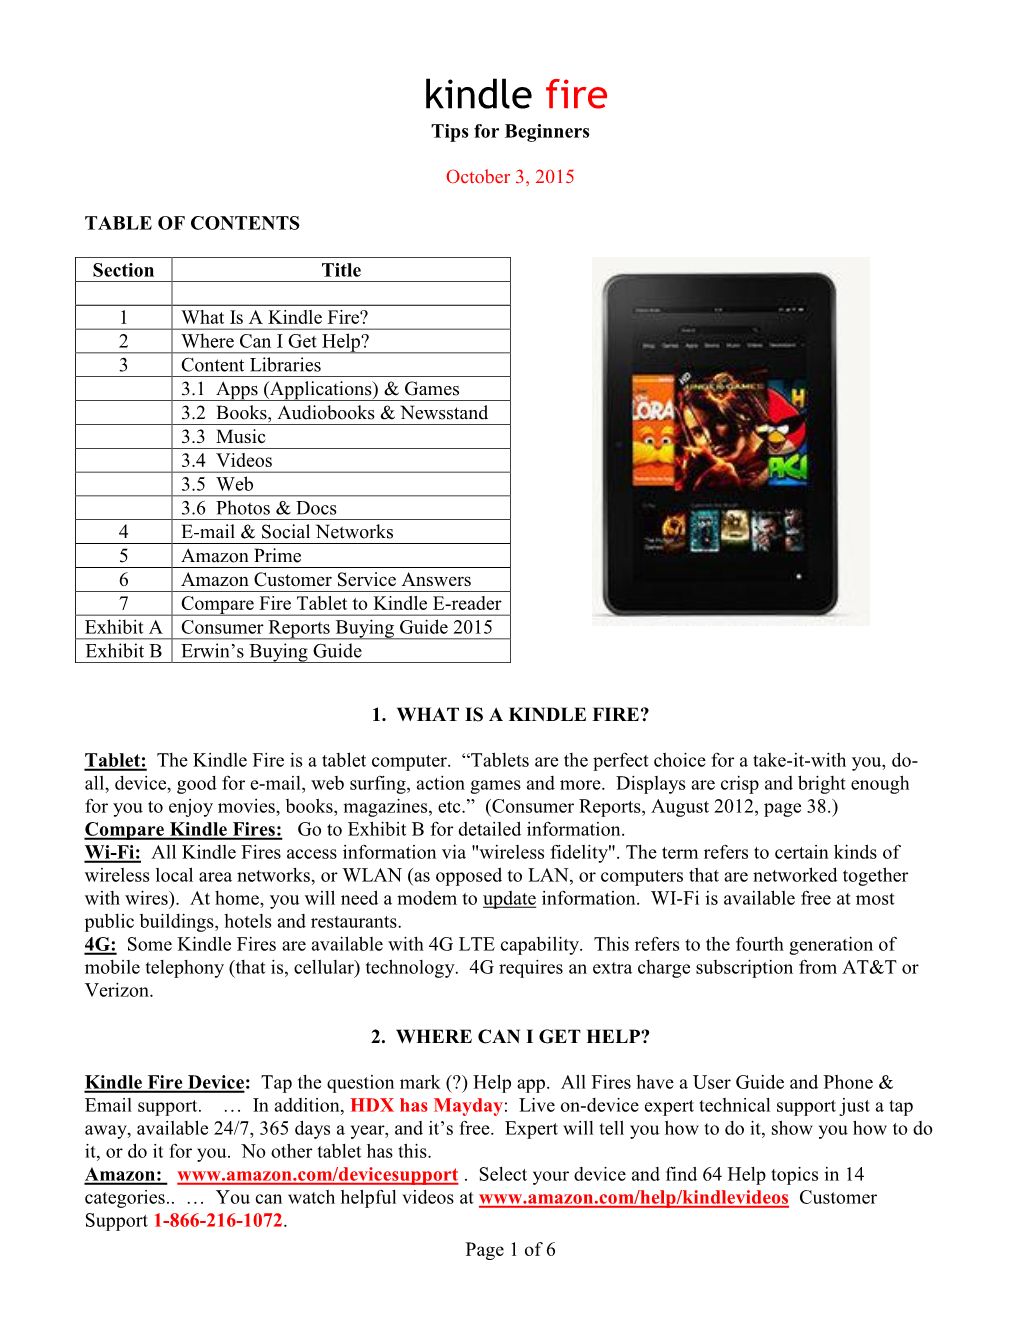 Kindle Fire Tips for Beginners